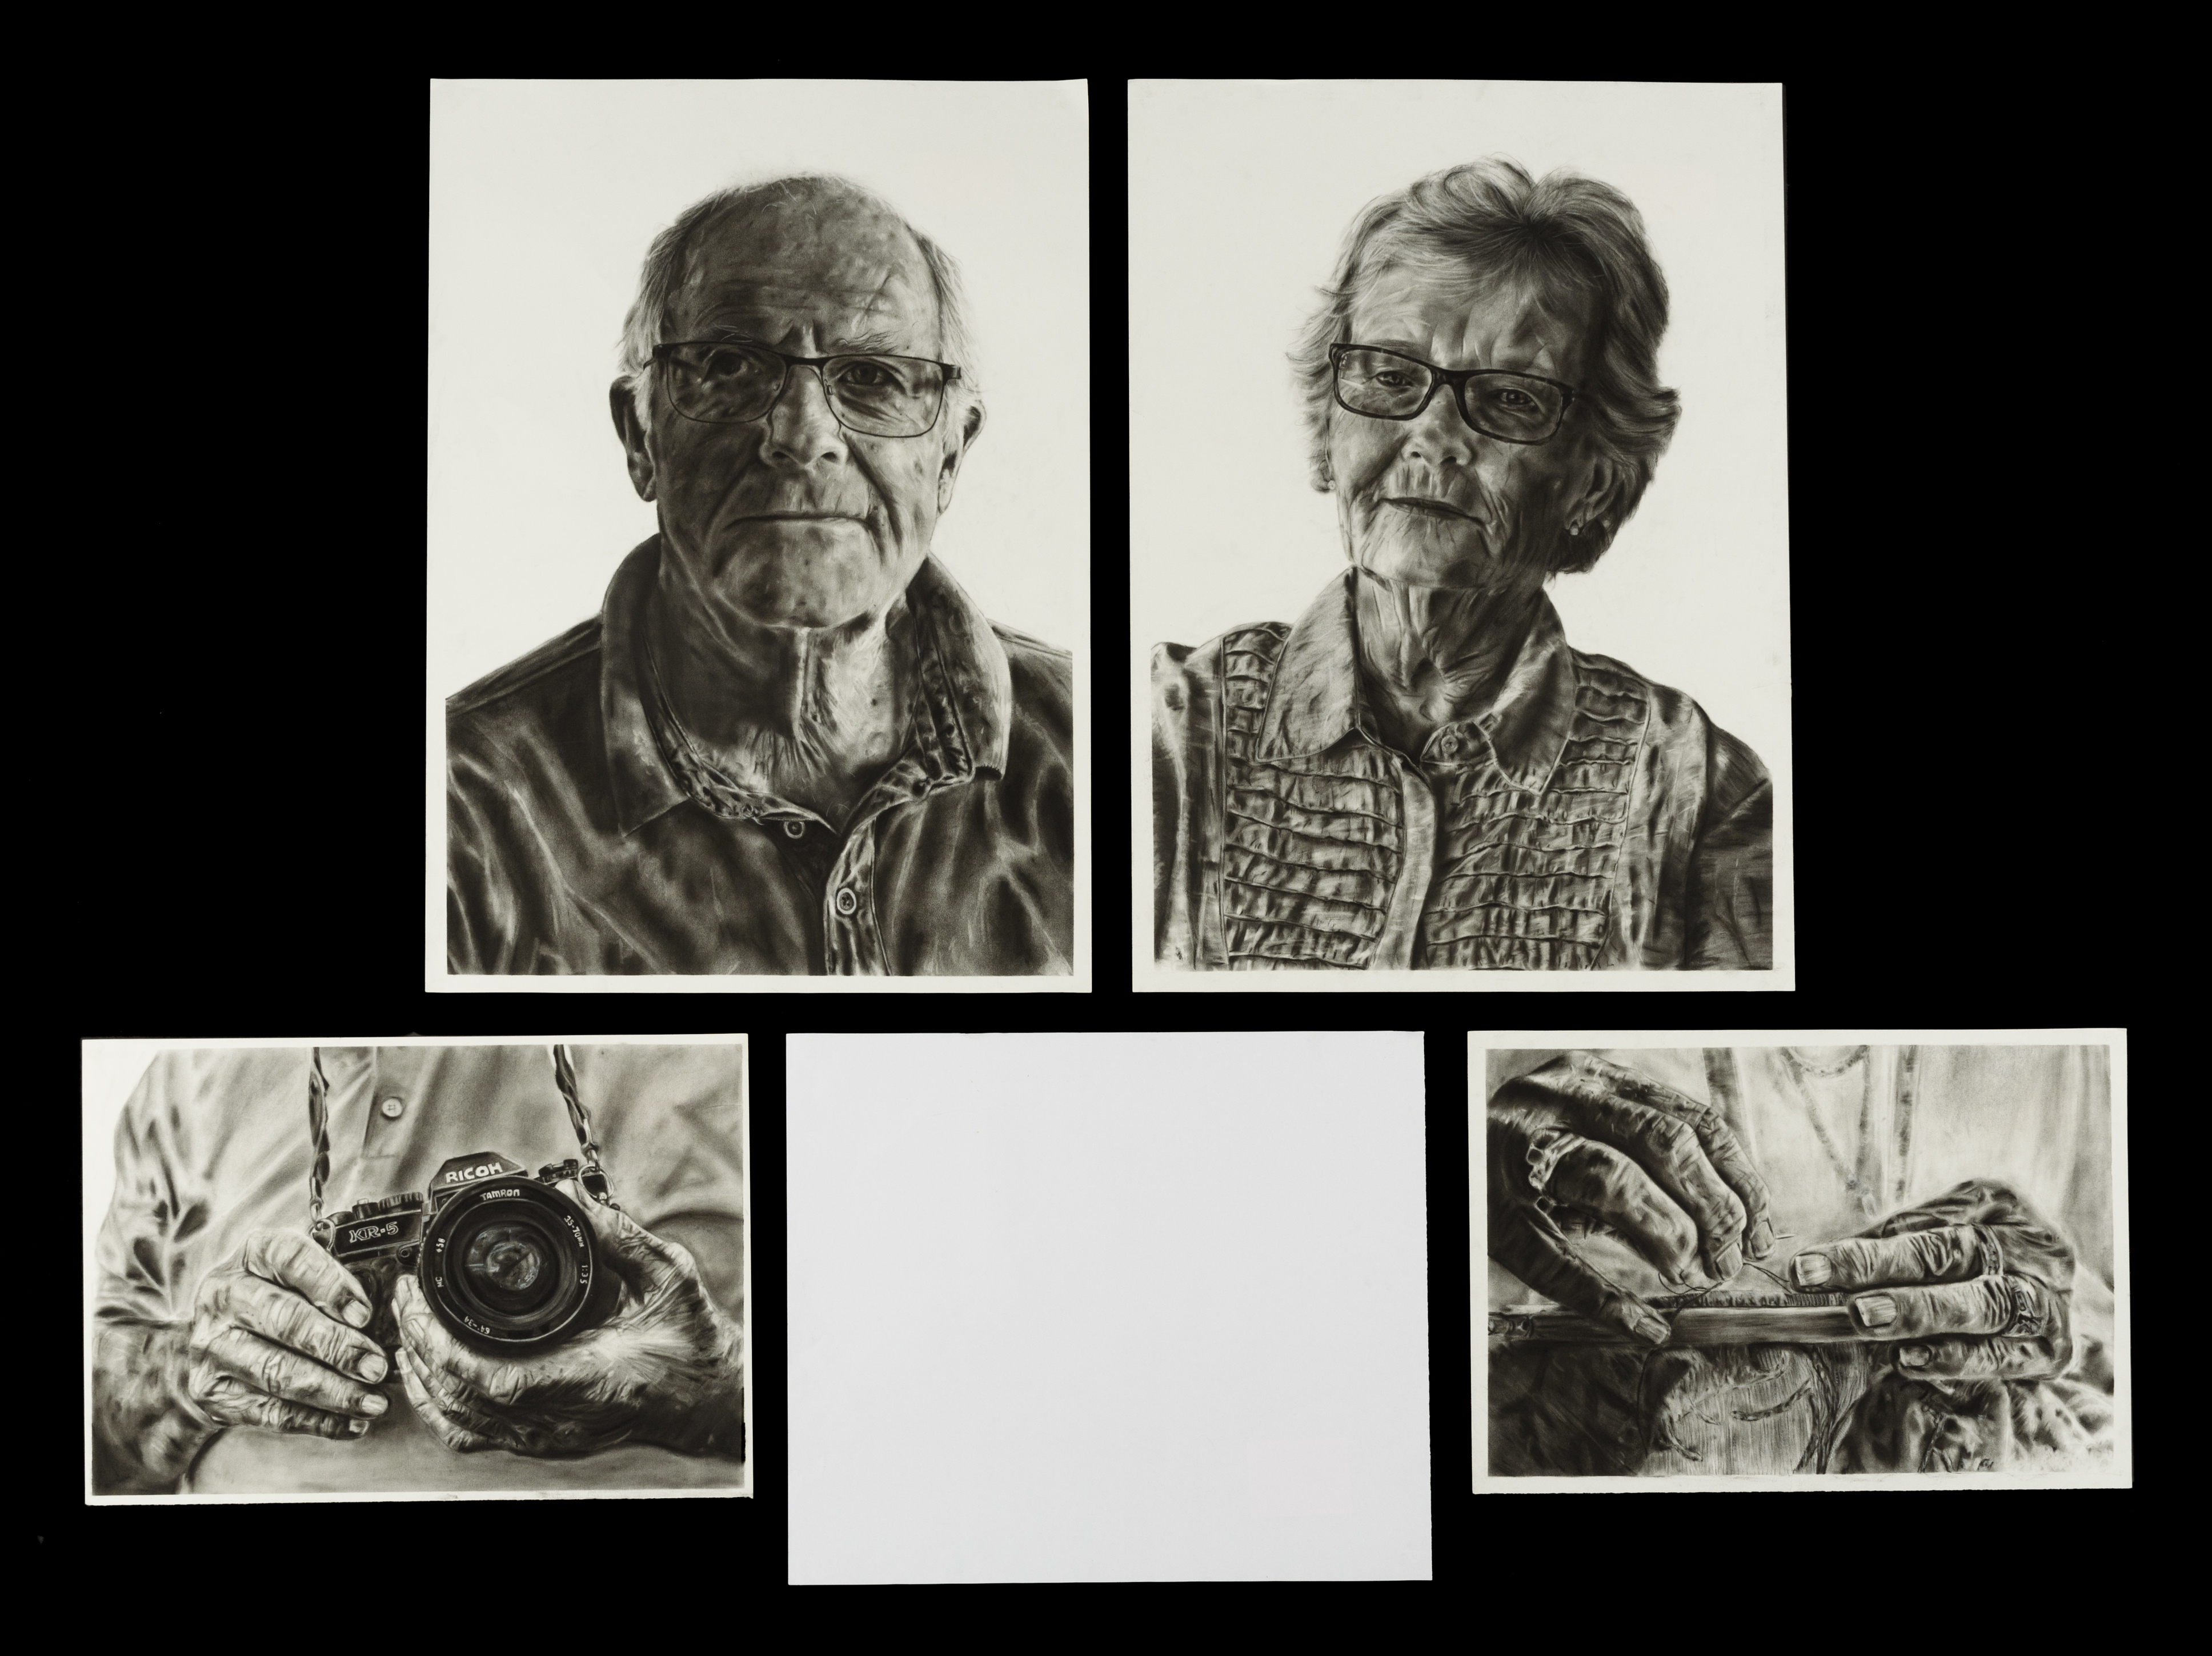 A four panelled charcoal drawing, two portraits at the top are of an older man and woman. Below the portraits are drawings of their hands, the man is holding a camera and the woman an embroidery hoop.